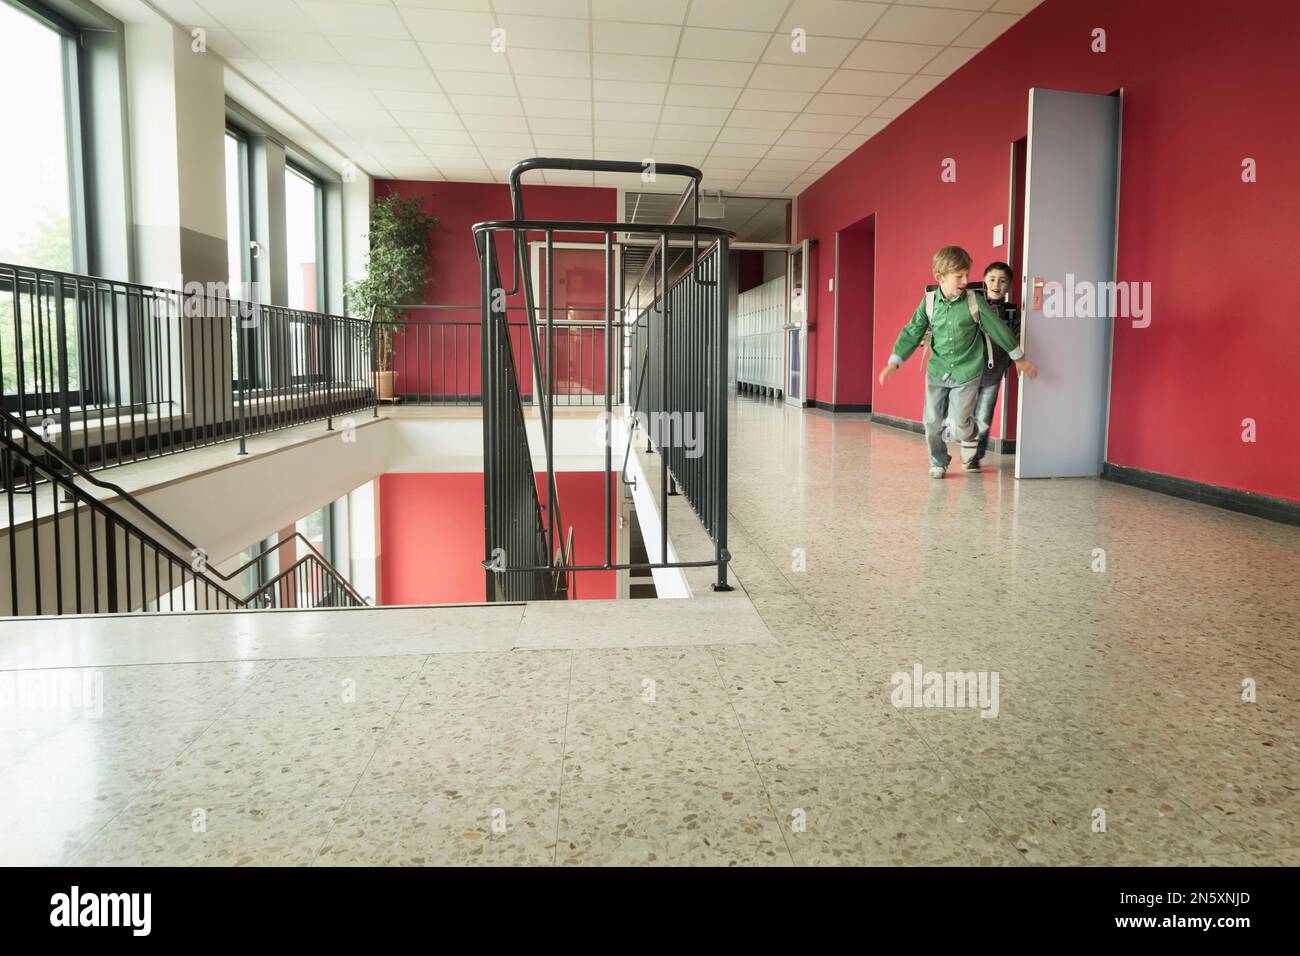 Schoolboys running out of classroom, Bavaria, Germany Stock Photo